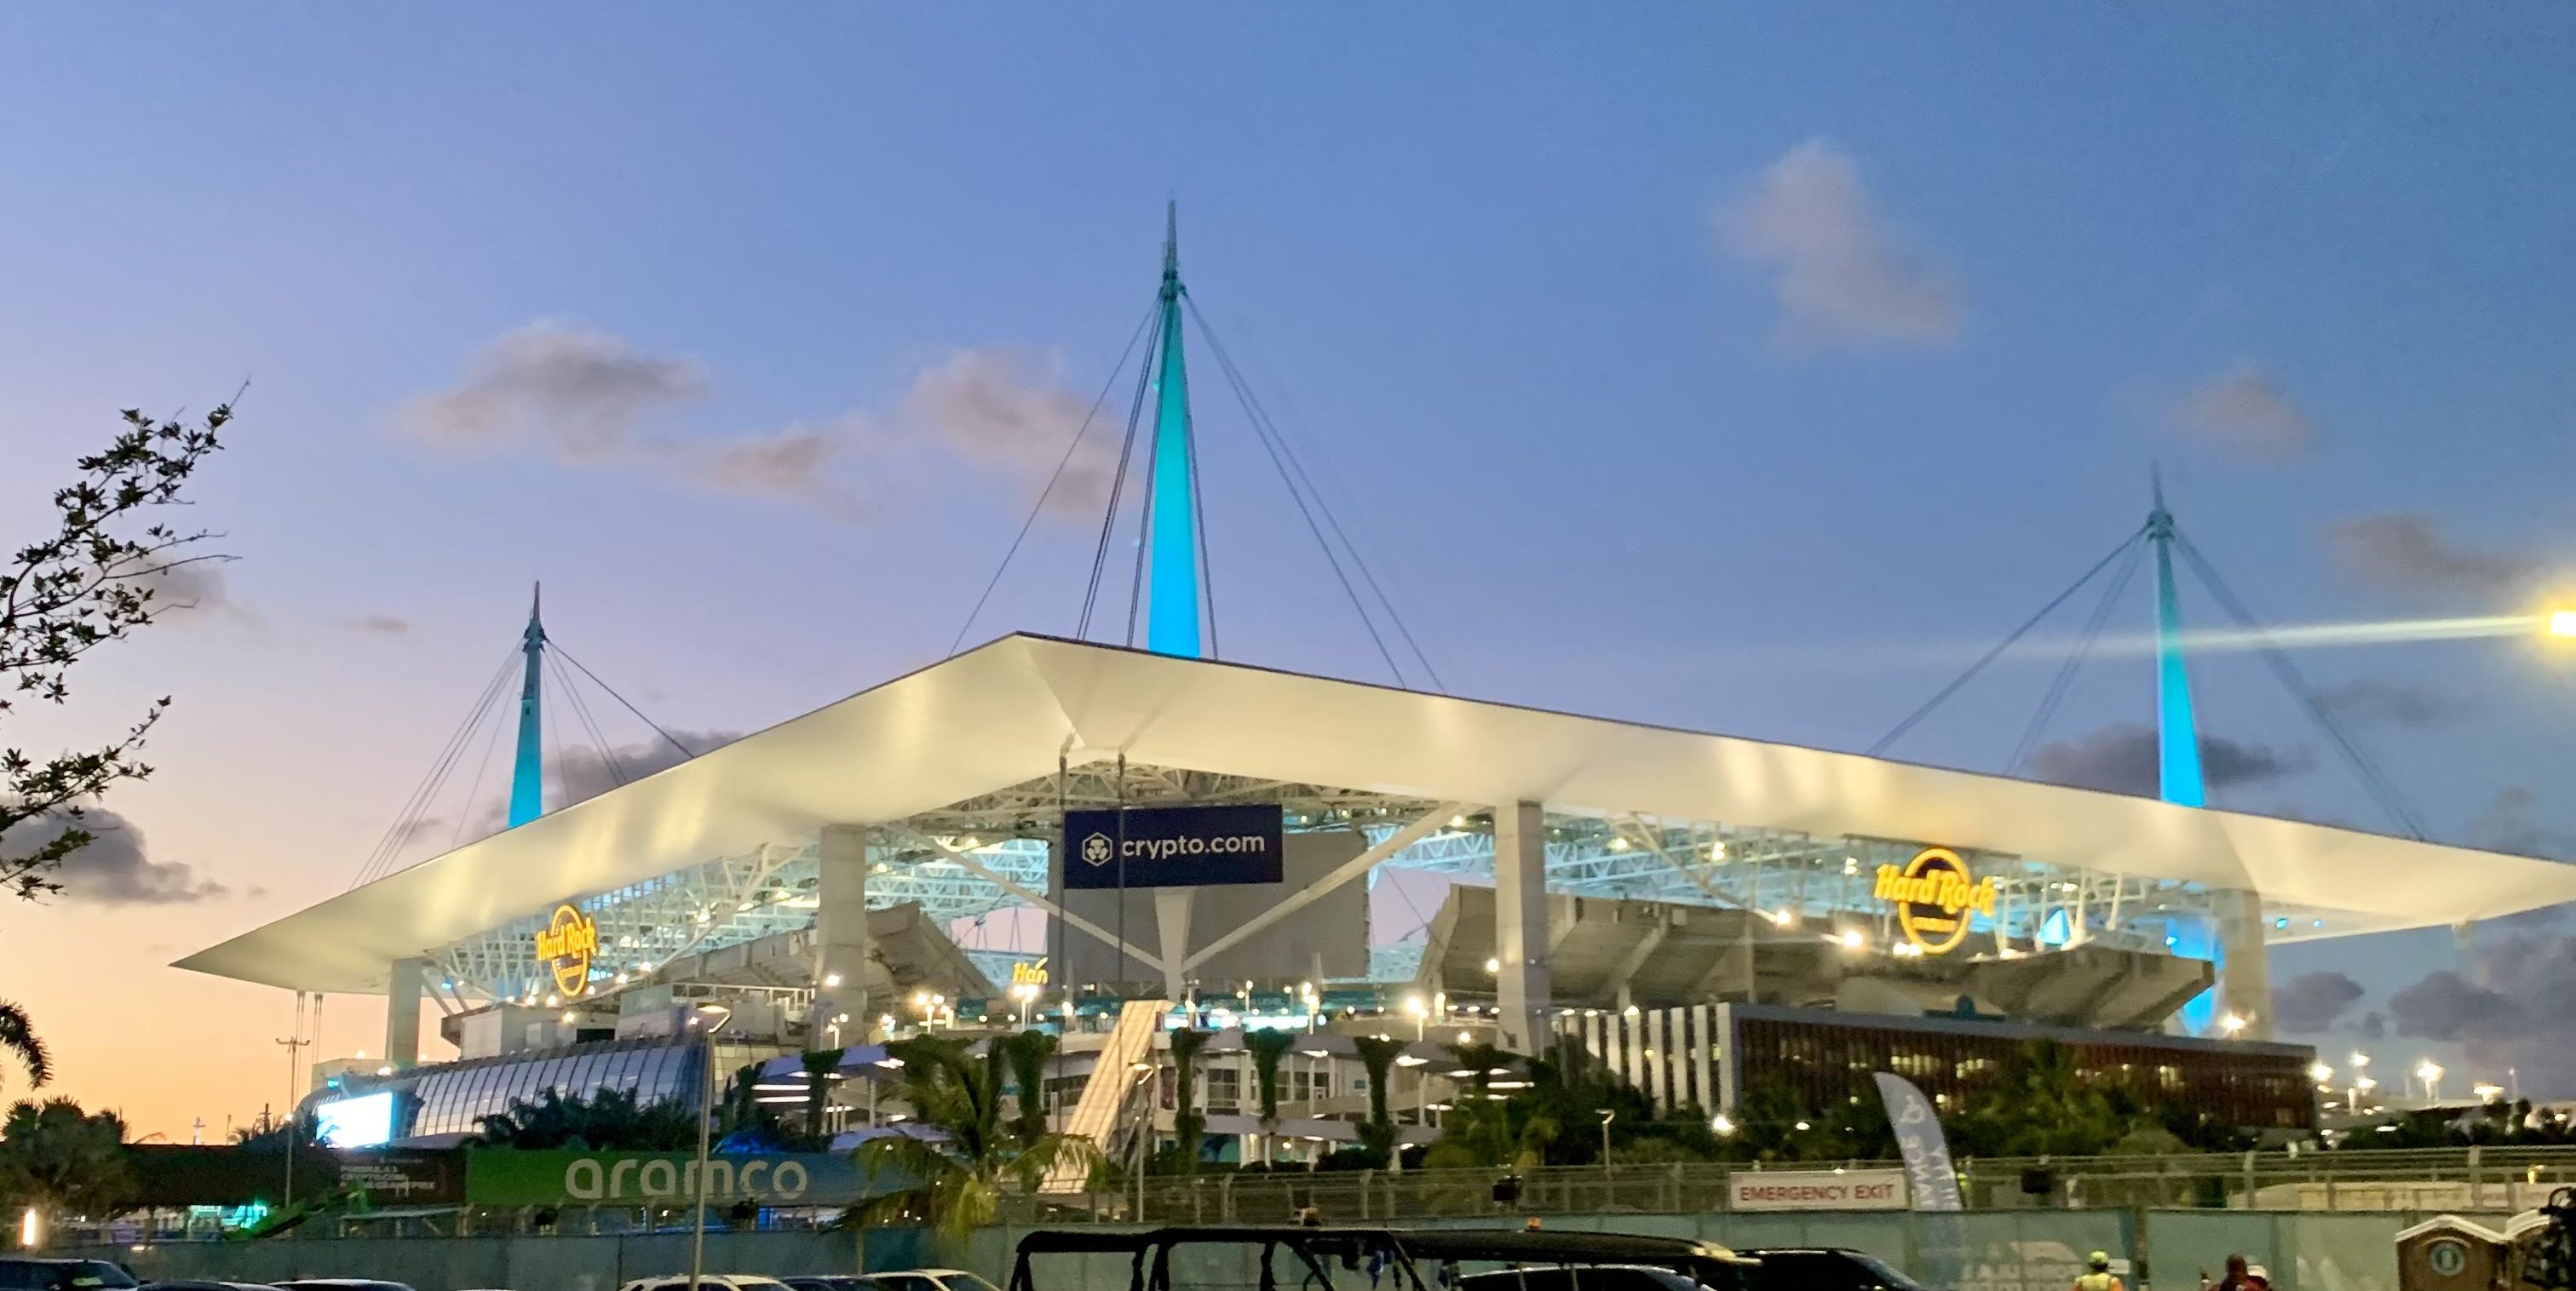 The Hard Rock Stadium offers an incredible site venue!